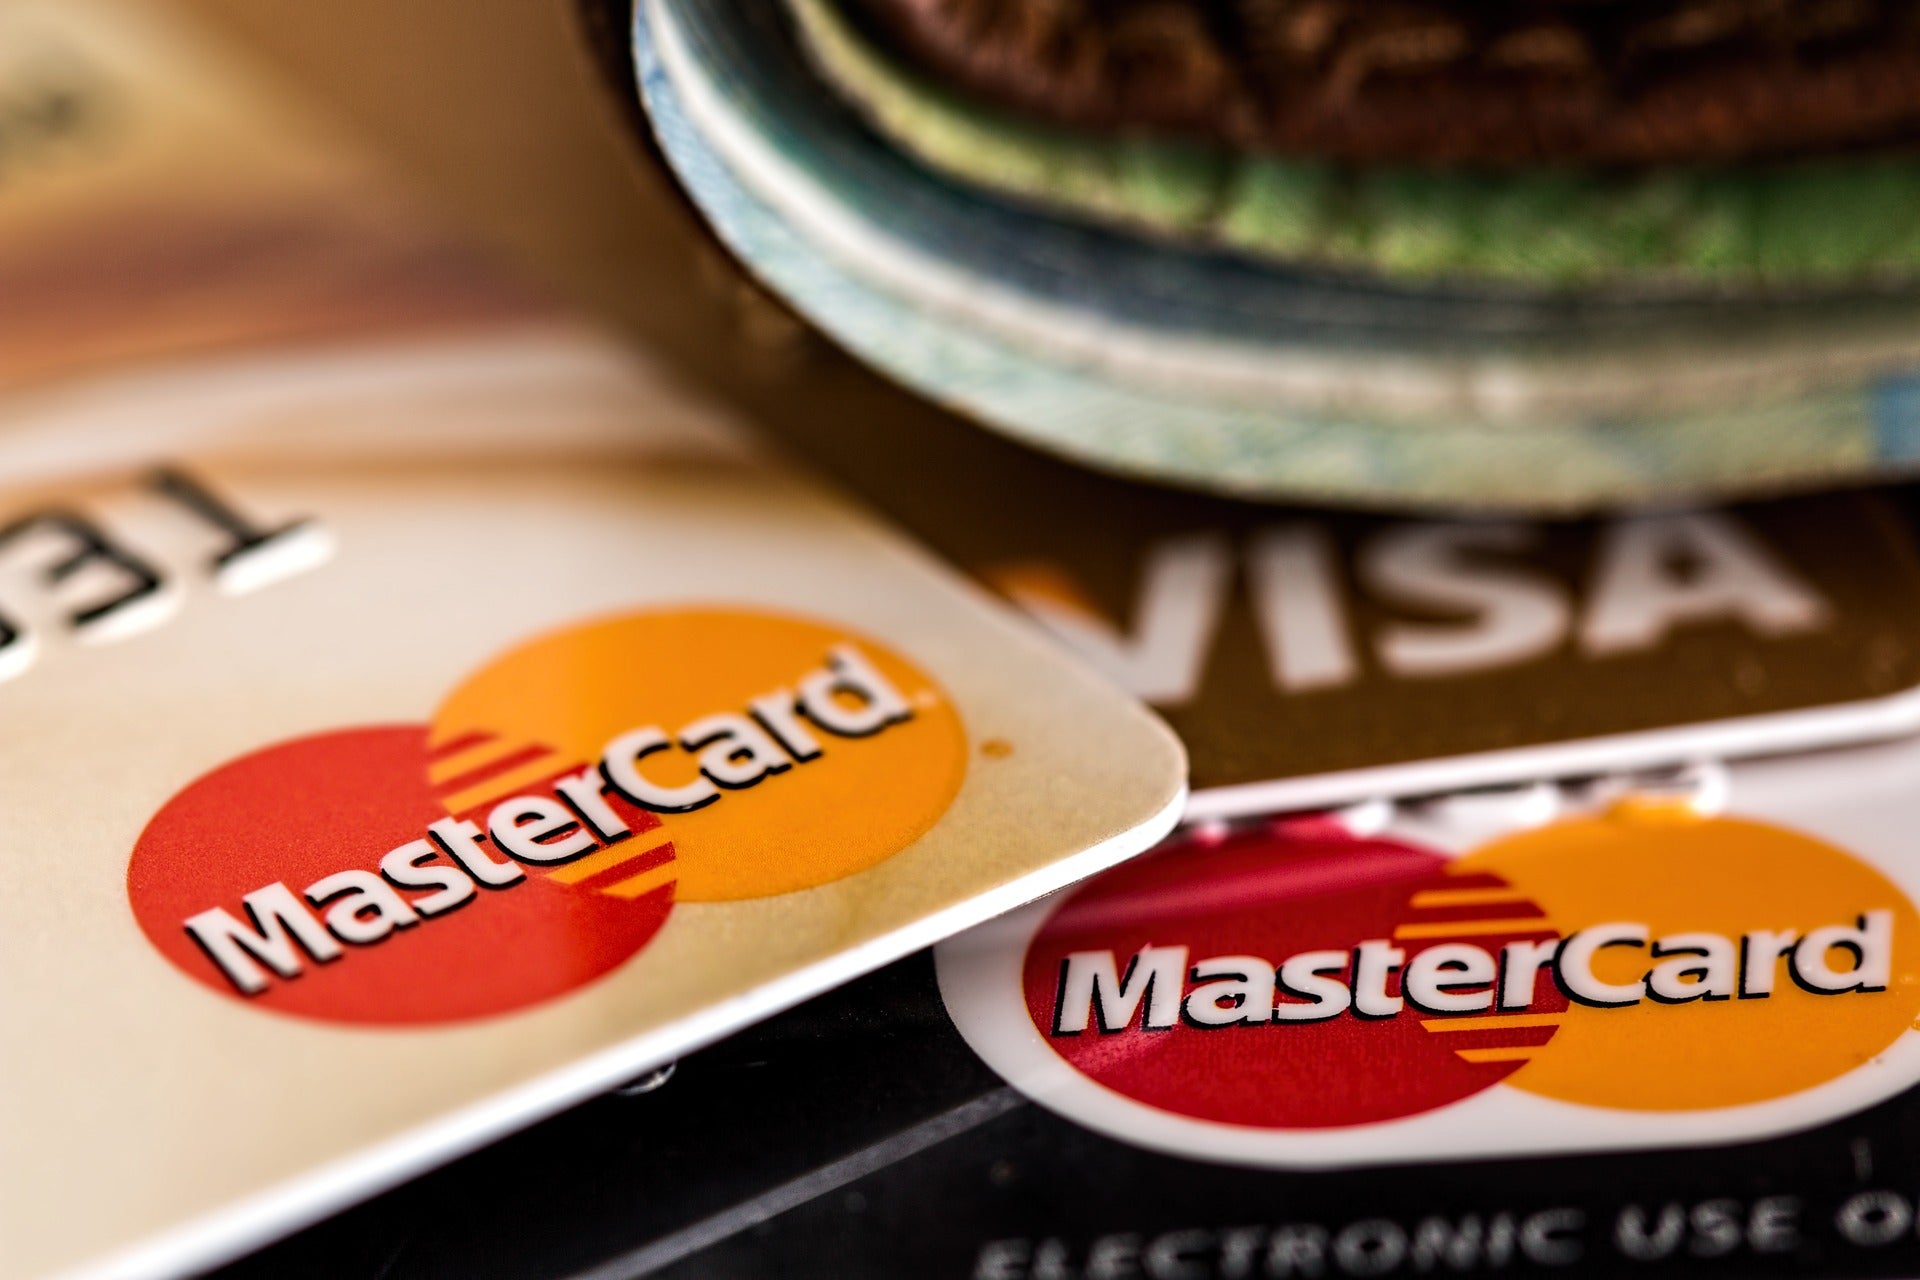 Zemen Bank, Mastercard team up to launch new prepaid travel card in Ethiopia